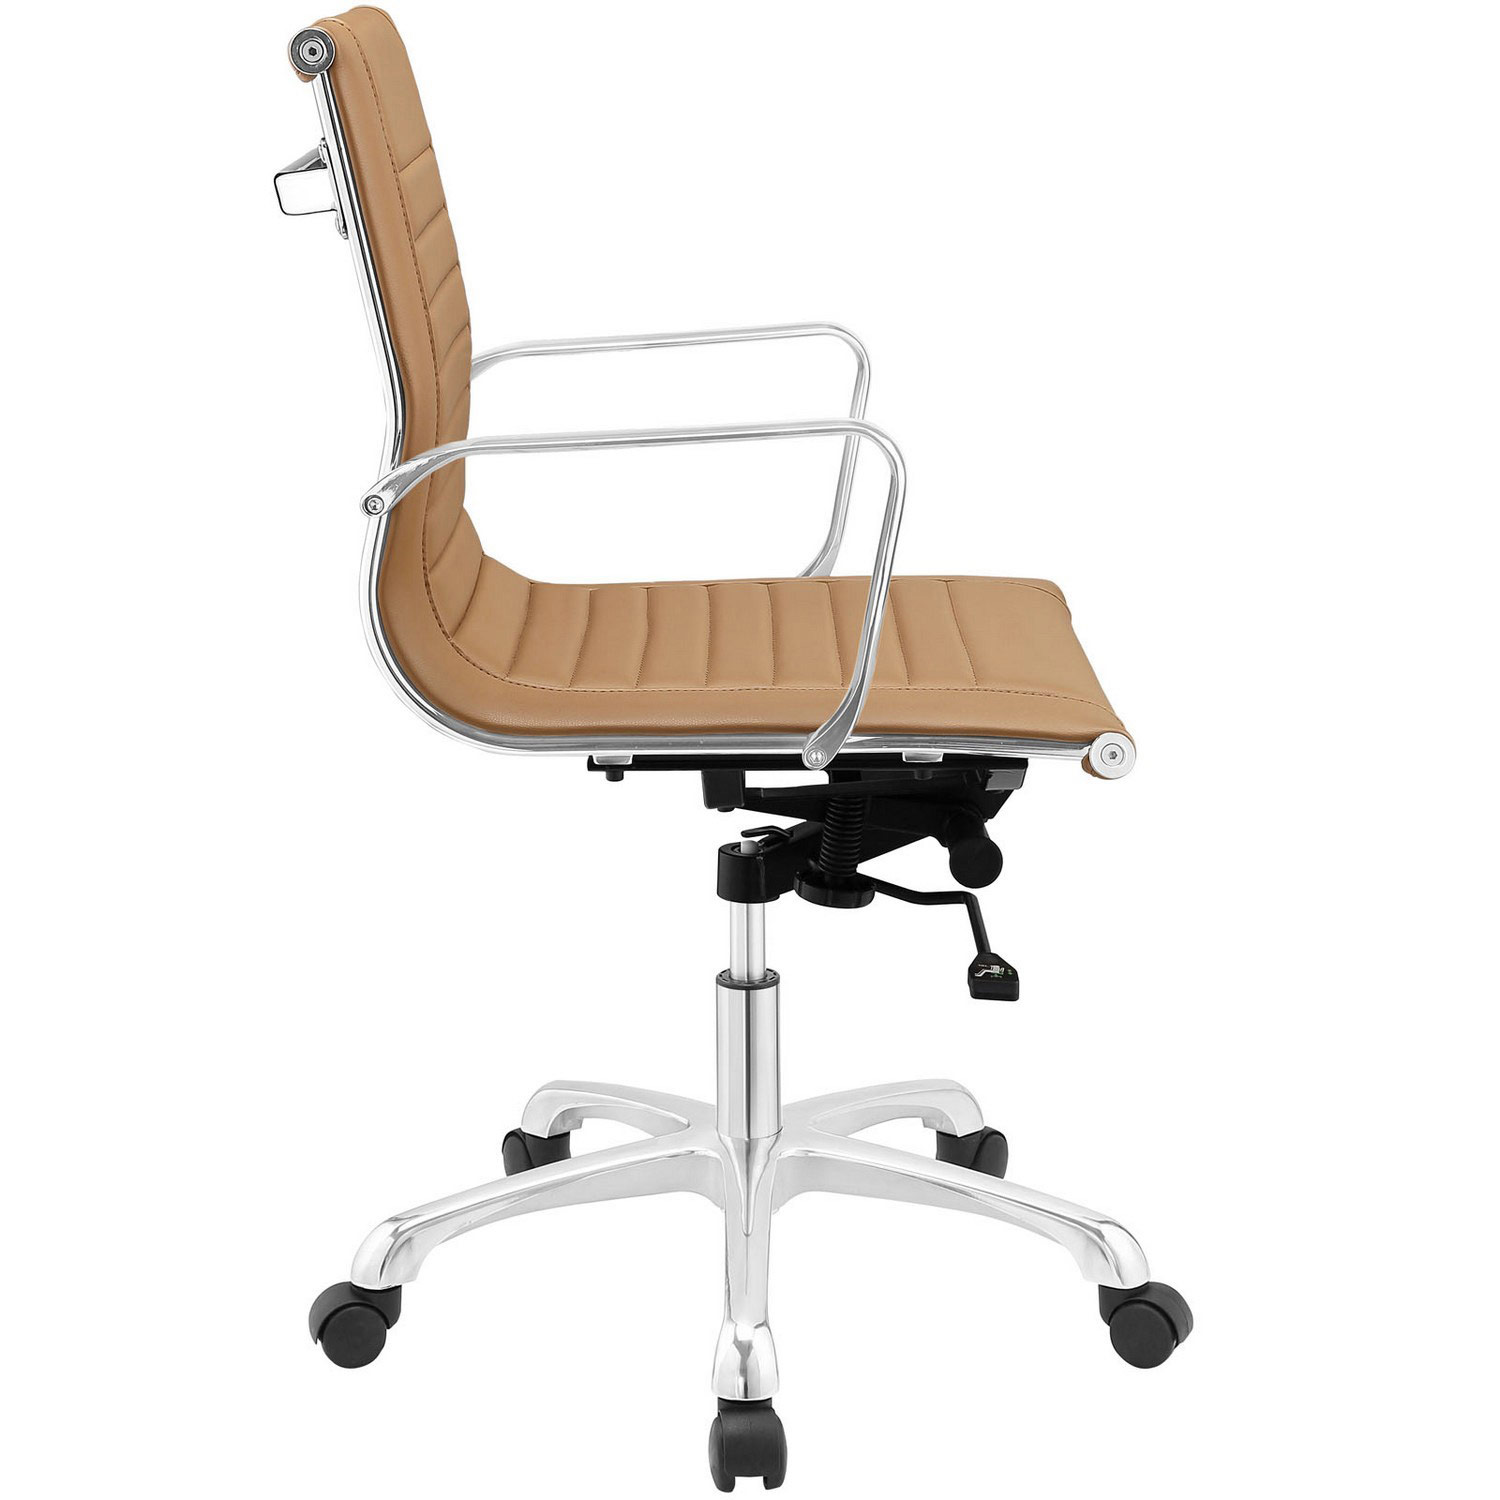 Modway Runway Mid Back Office Chair - Tan